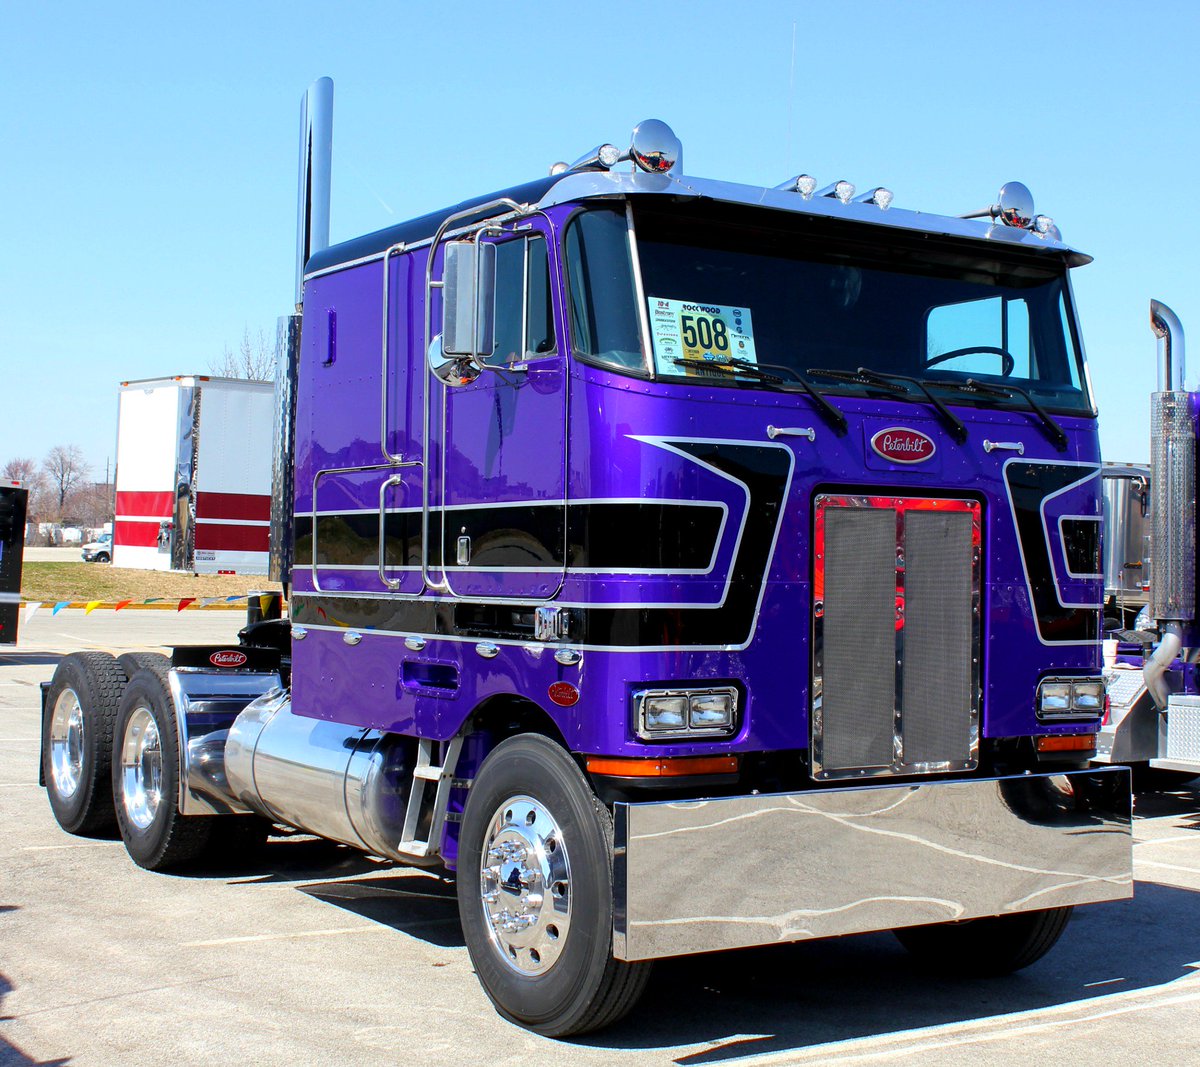 Take a look at this awesome Peterbilt cabover! #Trucking #TruckingDepot #Truckers #Cabover